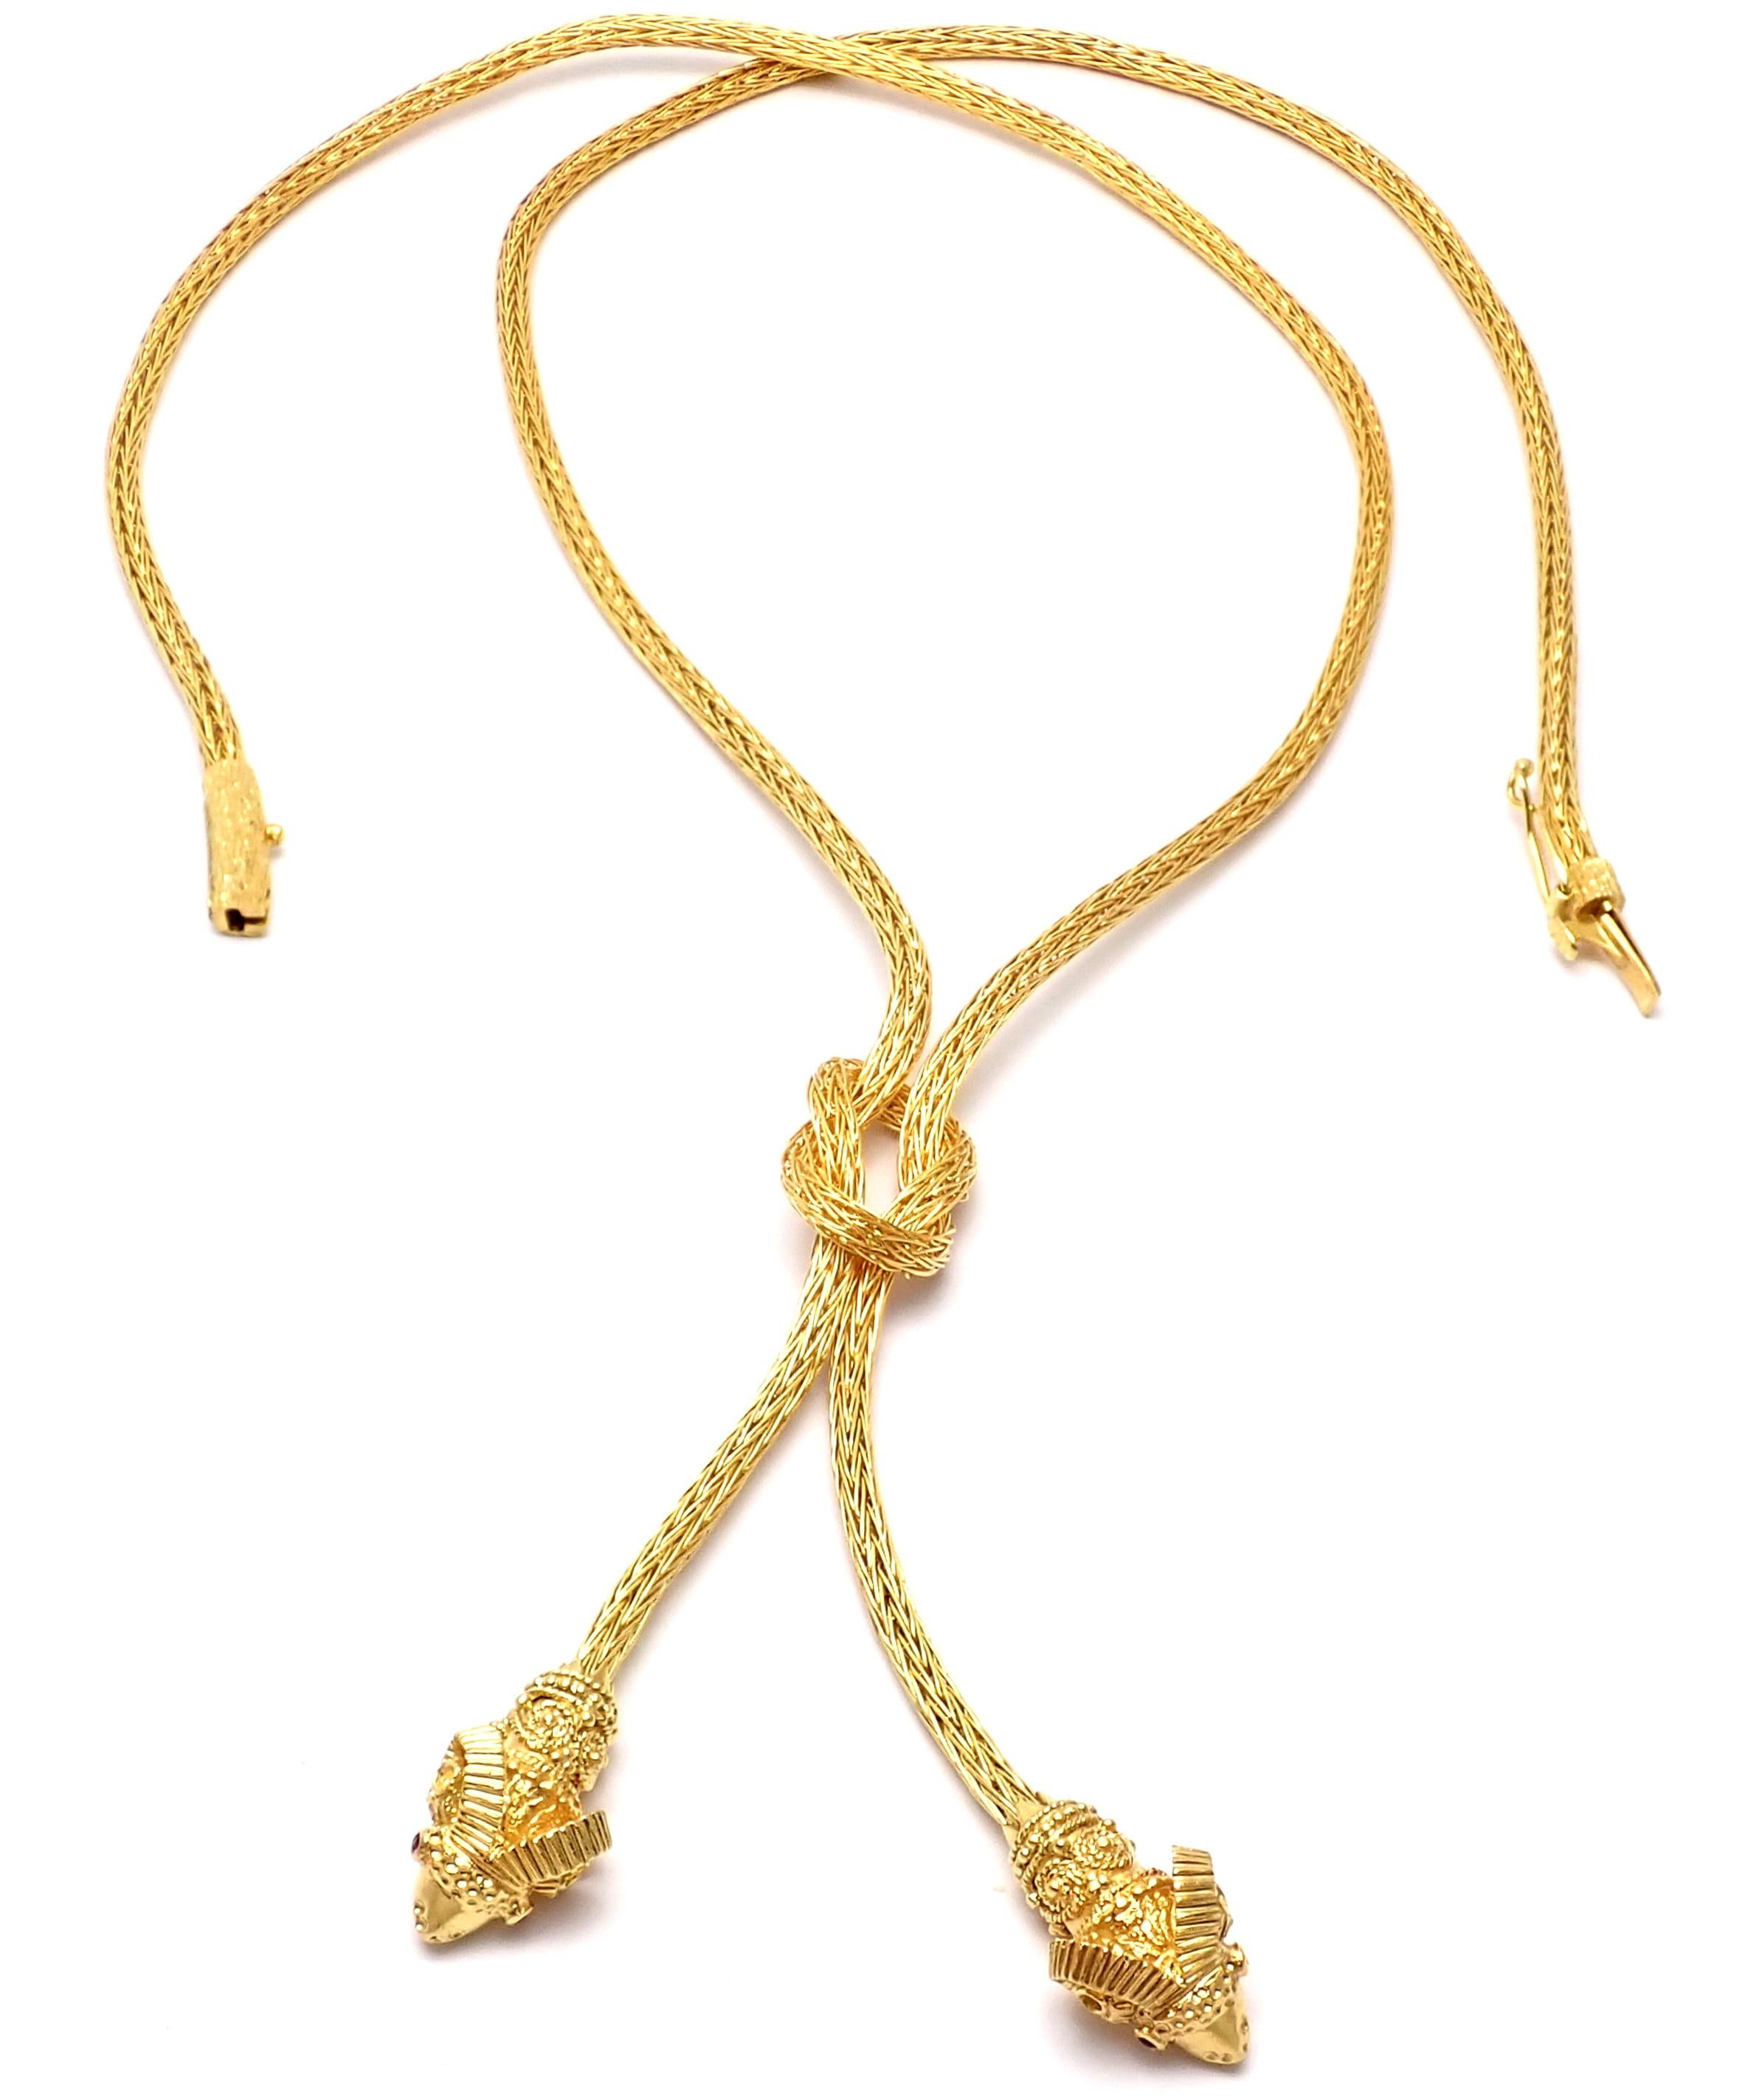 Ilias Lalaounis Greece 18k Yellow Gold Ruby Hercules Knot Ram Head Necklace By Illias Lalaounis Greece
With 4 small rubies in the eyes
Details: 
Length 24